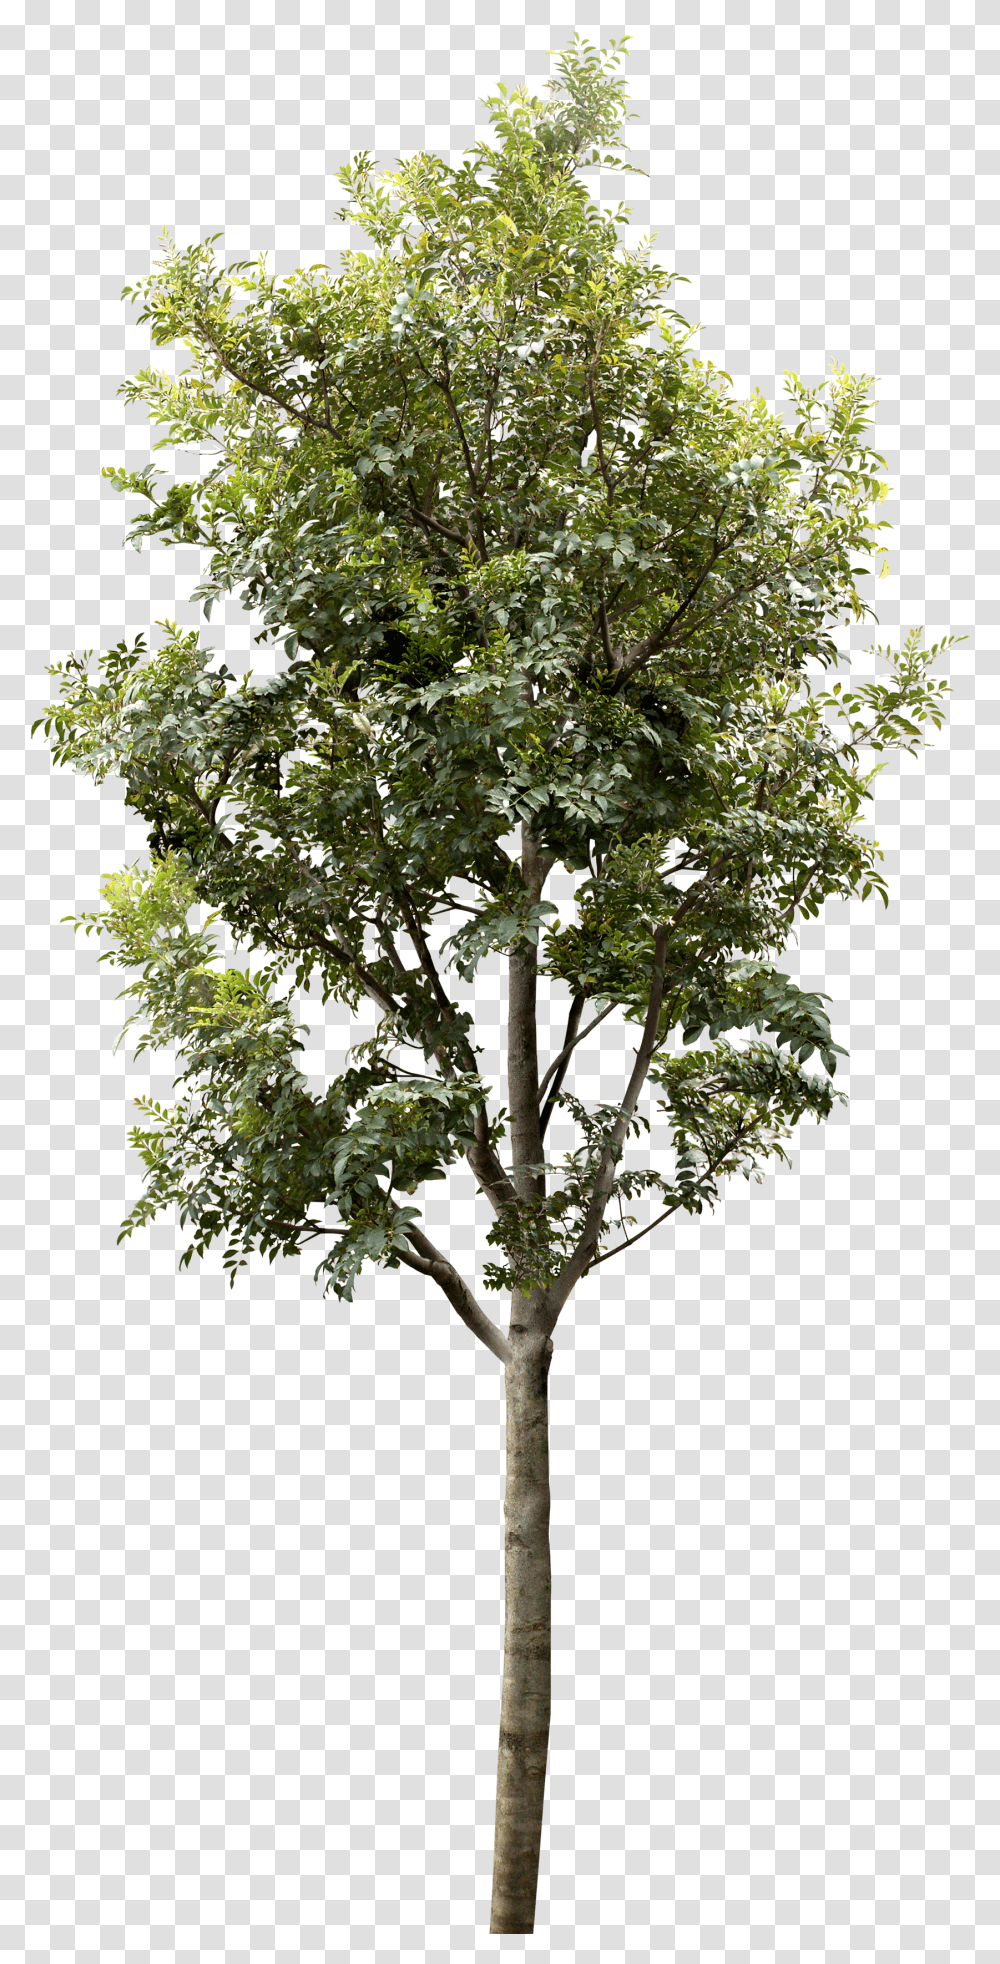 Trees For Architectural Rendering Transparent Png